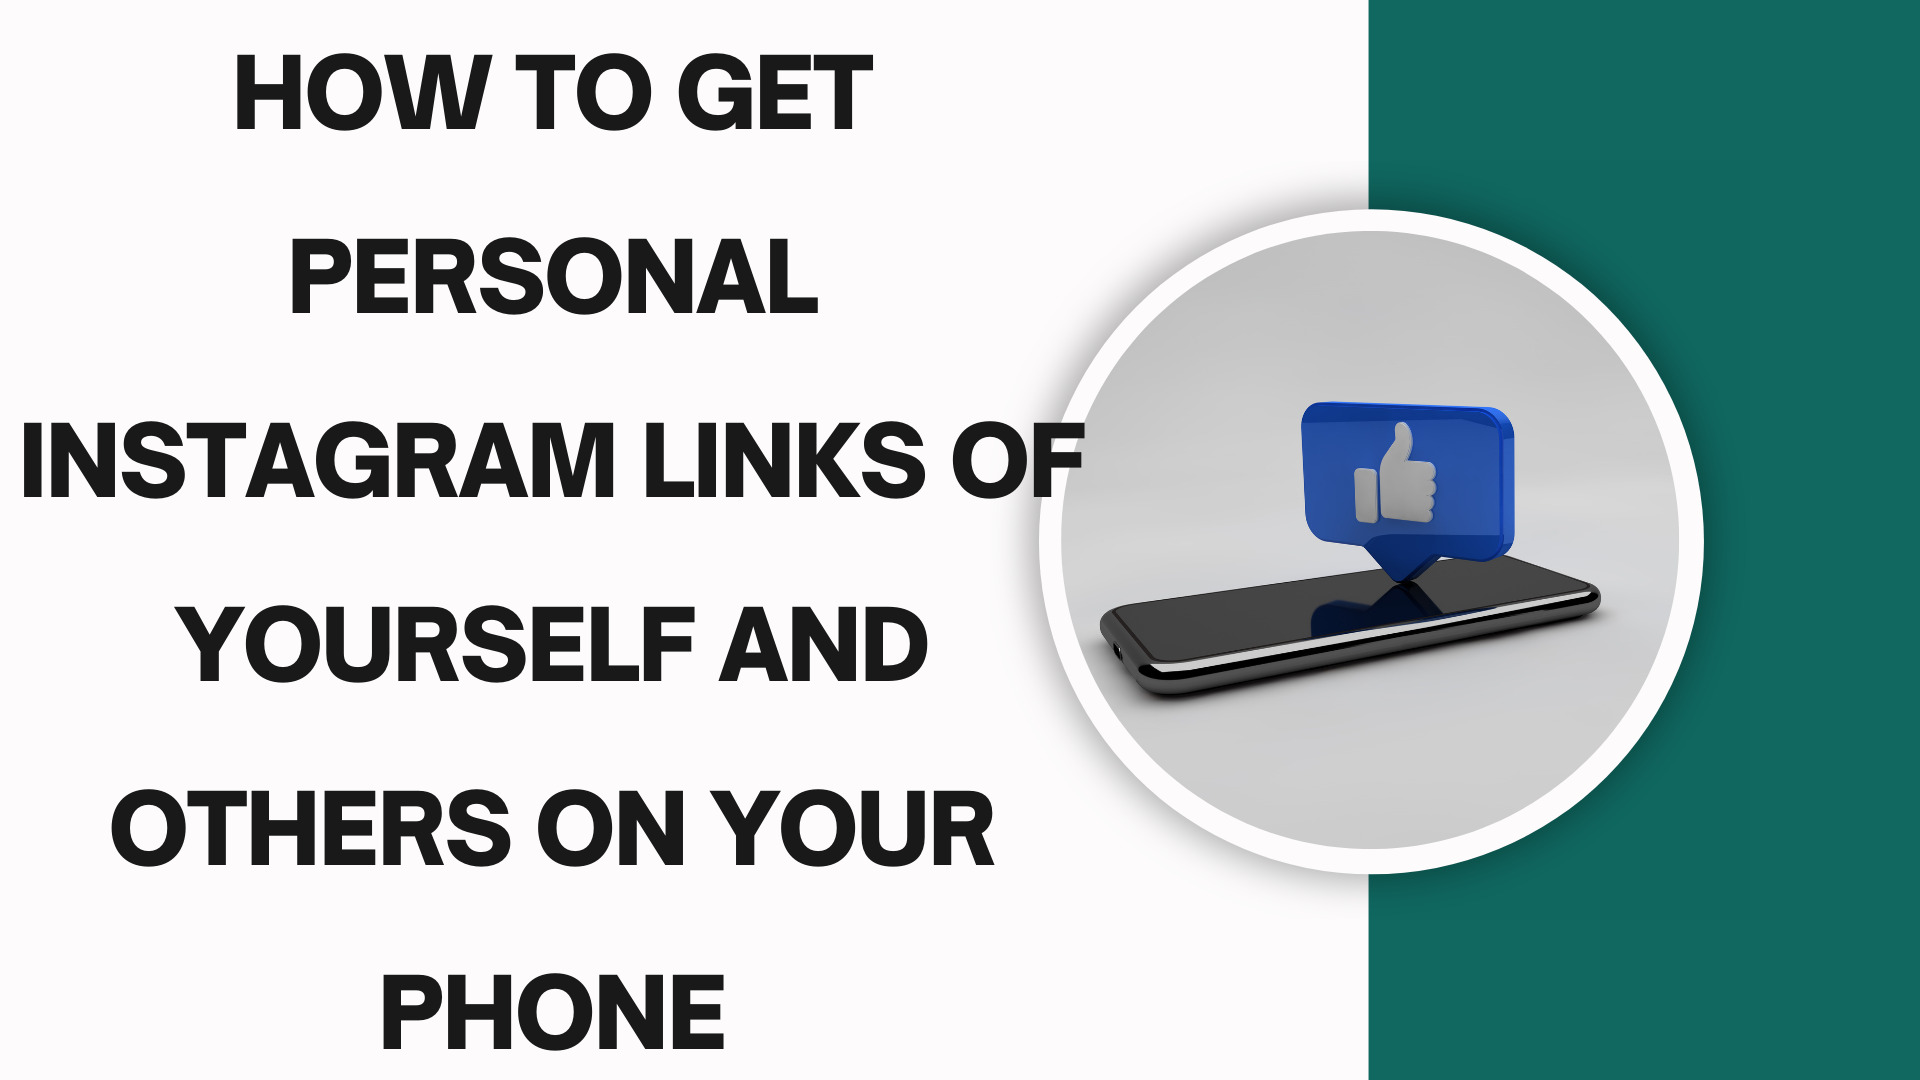 How to get personal Instagram links of yourself and others on your phone